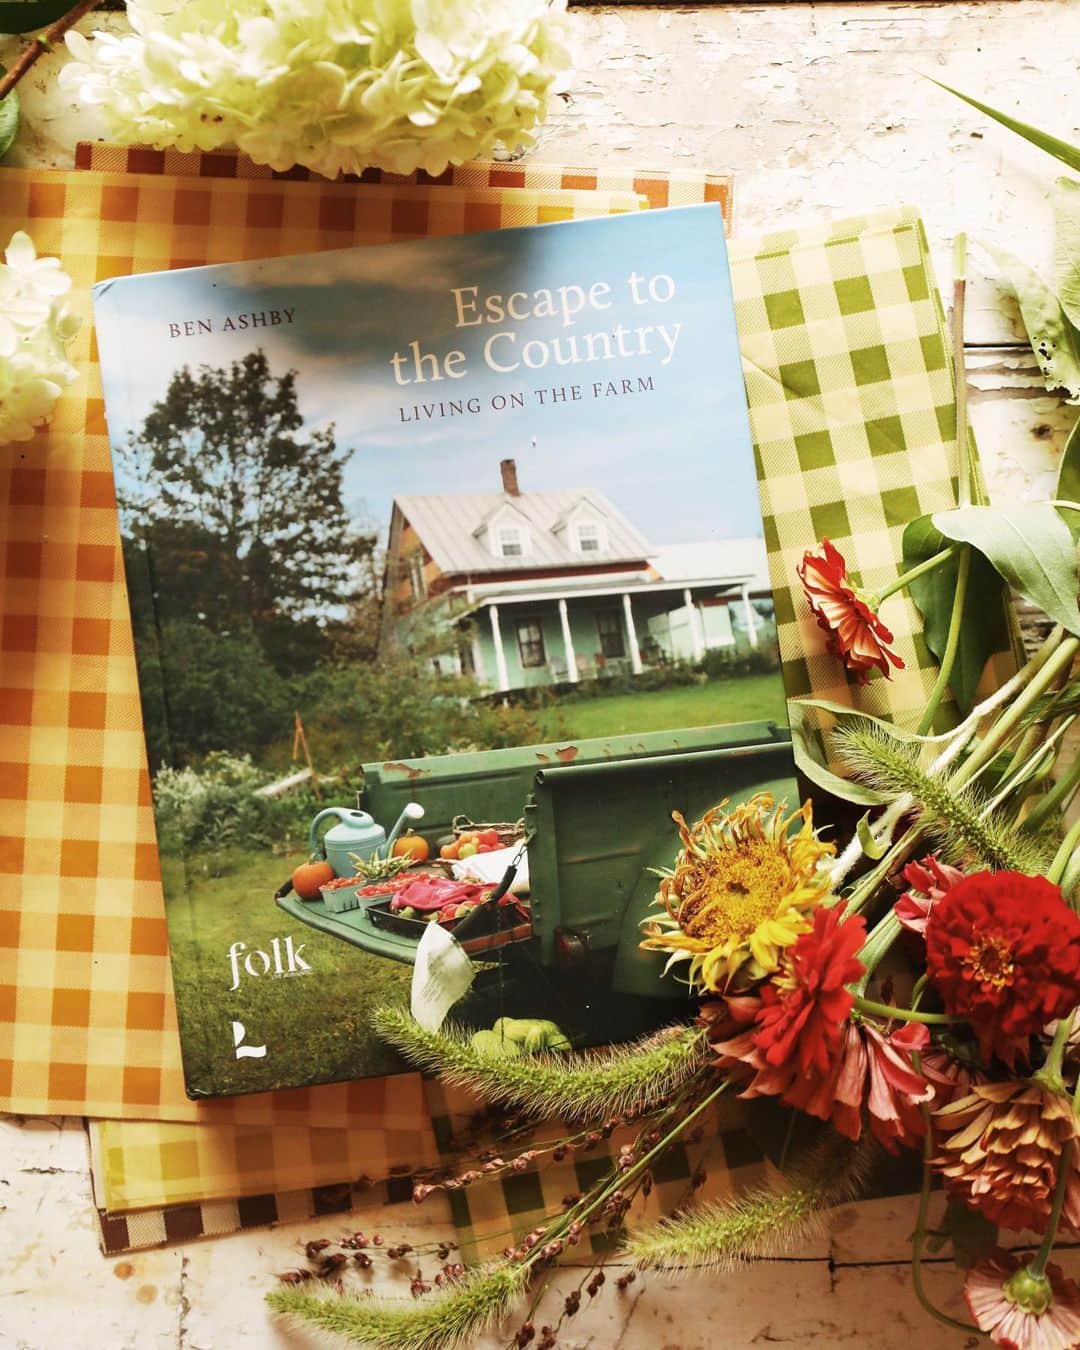 FOLKのインスタグラム：「🍎ESCAPE TO THE COUNTRY — LIVING ON THE FARM  a hardcover coffee table book by folk | now available   It was a passion project that took a year longer than expected. A journey from living in The City to moving back to western Kentucky and into a 120 year old farmhouse that was built by my great great grandparents. It had been a dream since I was four to one day own this place and to live a quiet life in the country....a bucolic valley in the middle of nowhere that my family first settled in the 1780s. This book follows that journey, but in the process it took on a life of its own.   This coffee table book, a long and labored dream comes out in the US in August, but a few advanced copies are available now via the website. They're packaged and ready to ship, without delay. The 250 page book is a true beauty with the stories of 18 others from all across the country that have decided upon a rural life, a dozen recipes, and over 100 beautiful and timeless photos of rural life and rural homes at their best.   Welcome yourself into a world that feels cozy and warm, like a meal or a visit with a long loved neighbor. This book is a piece you will want to revisit over and over again, and for me it is truly a dream come true.   The book, its stories, its photos, and the energy that flows through it represents a shift here at FOLK. The online shop has closed, the final orders are in the process of going out, and a return to story telling has arrived. We ask to you order a copy of this book, because we know you will love it, and we already have it ready to send your way.」